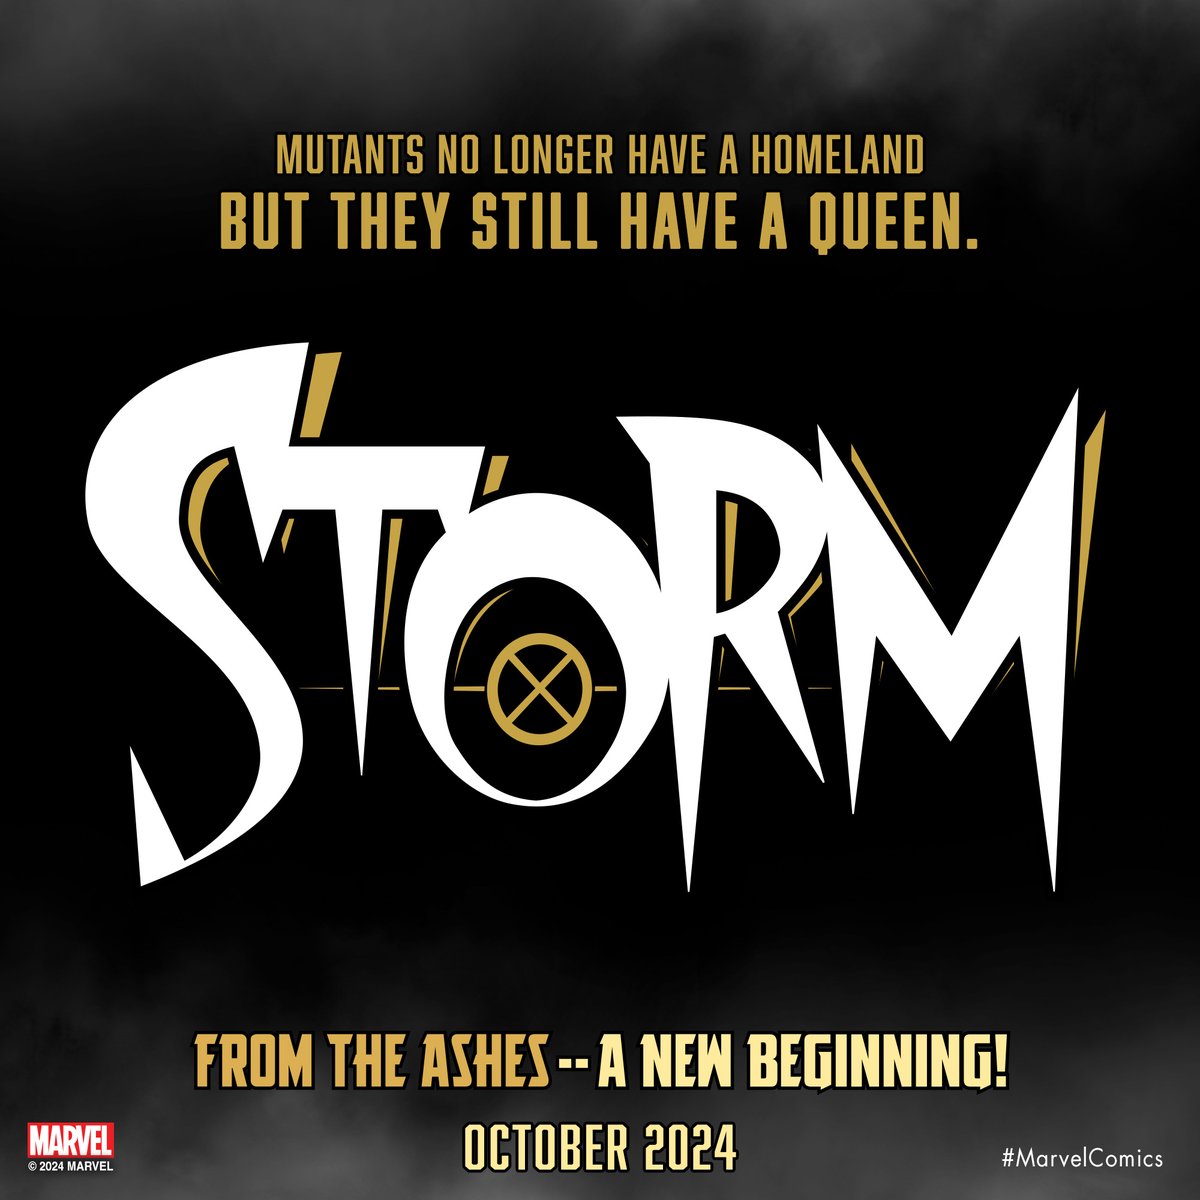 'Dazzler' and 'Storm', two all-new X-Men solo titles, launch later this year in the From the Ashes era. Stay tuned this week for more announcements, plus, find out which X-Man will be joining Earth's Mightiest Heroes in 'Avengers #17'. #MarvelComics